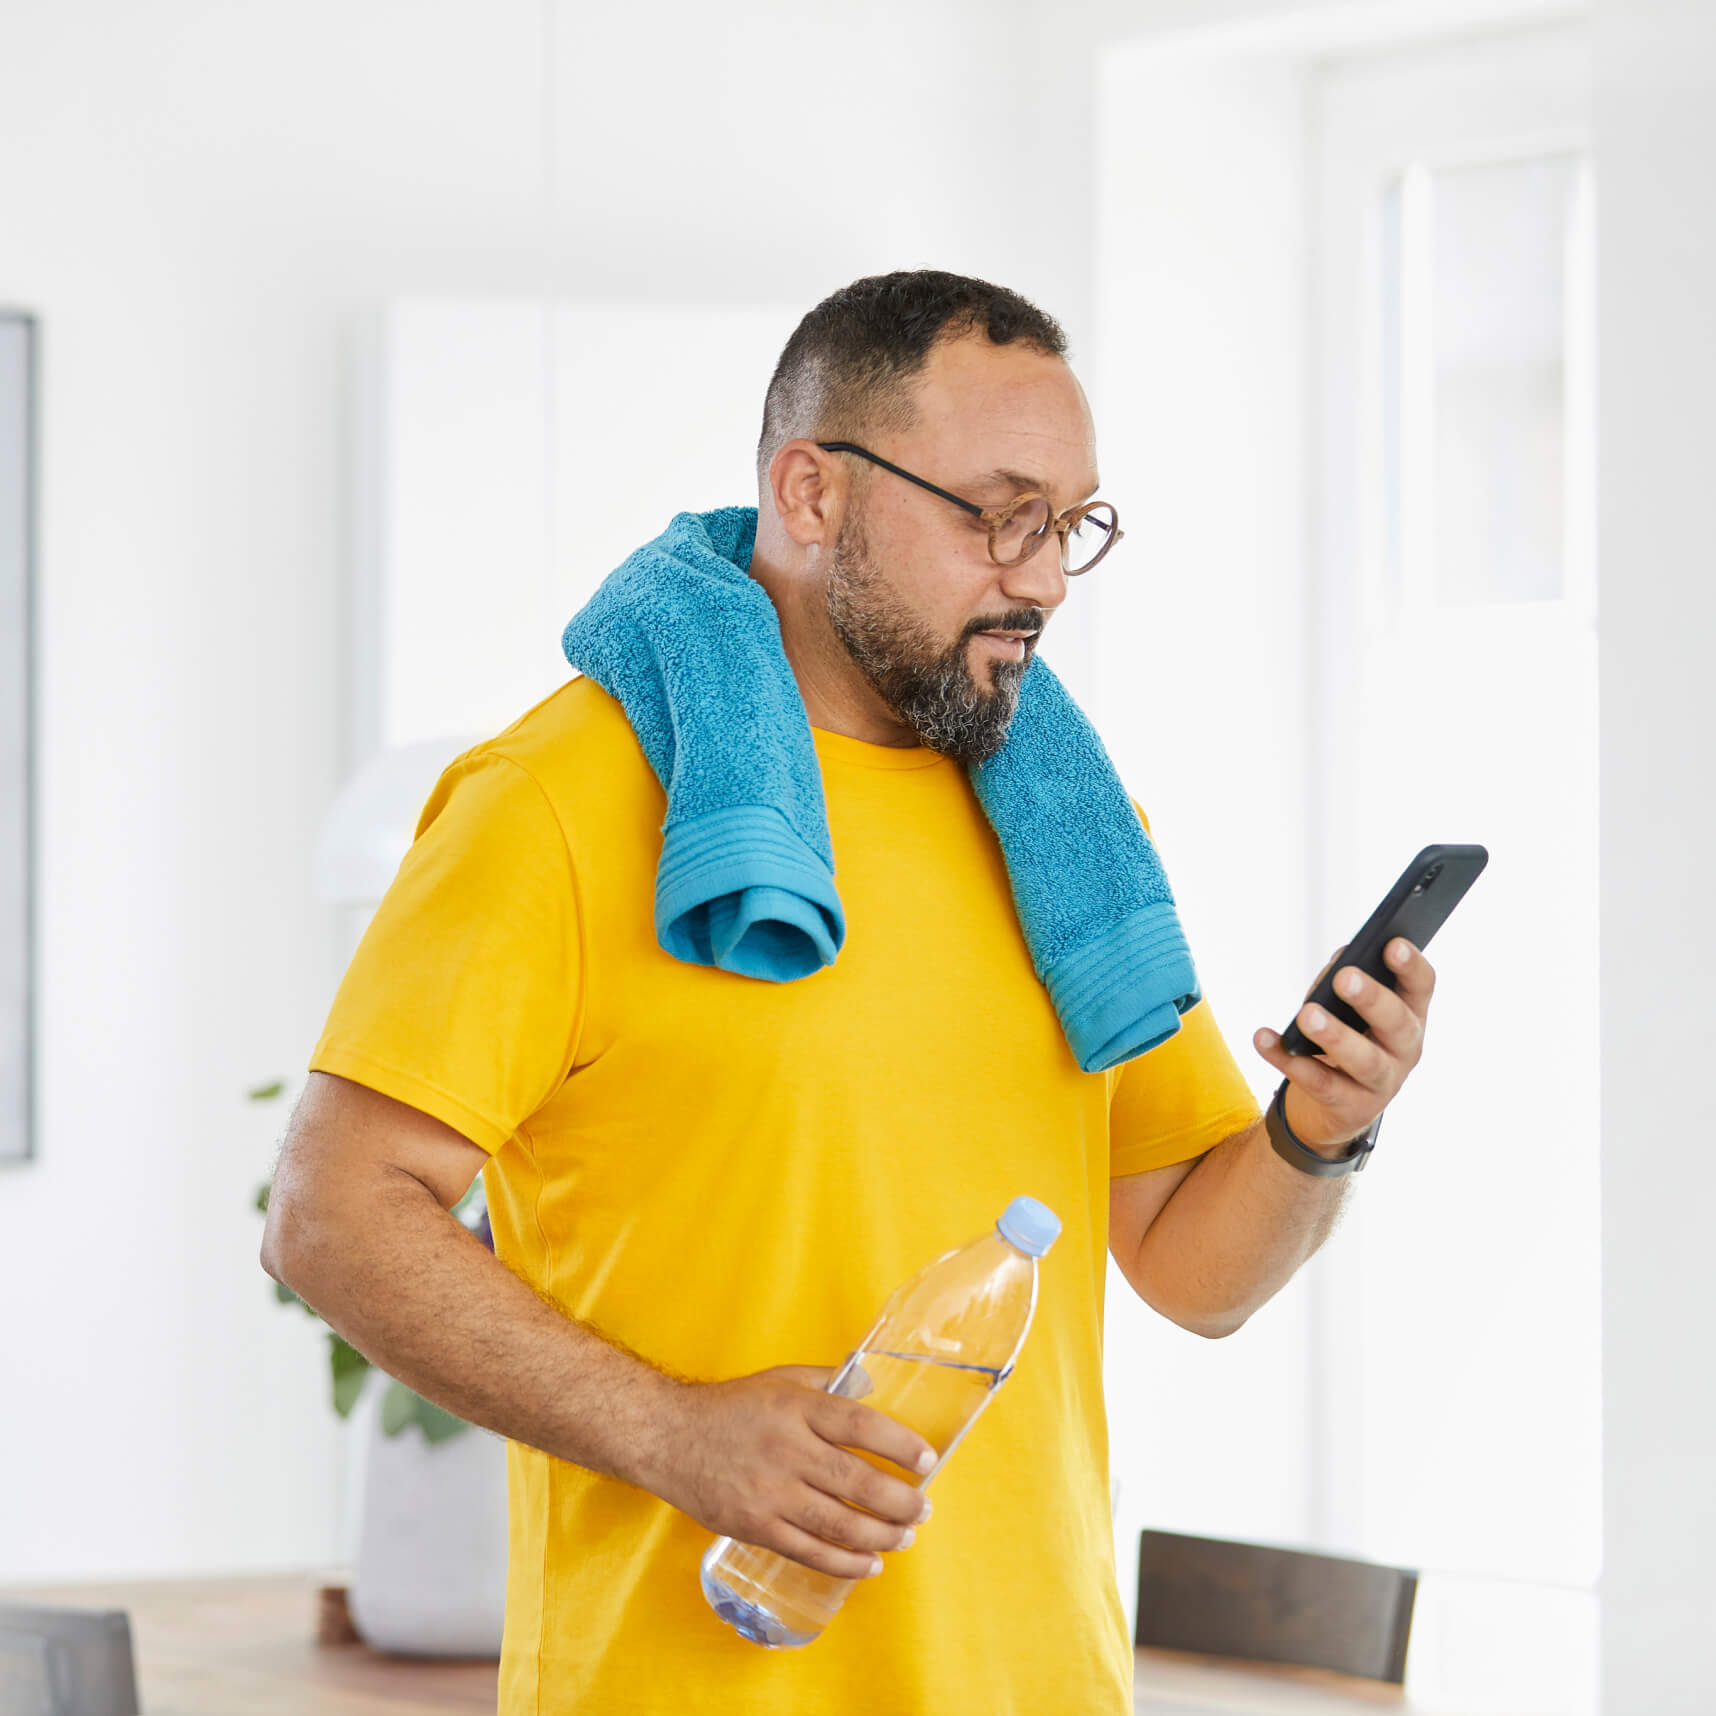 A man wearing a towel around his shoulders and holding a water bottle while looking at a smartphone.